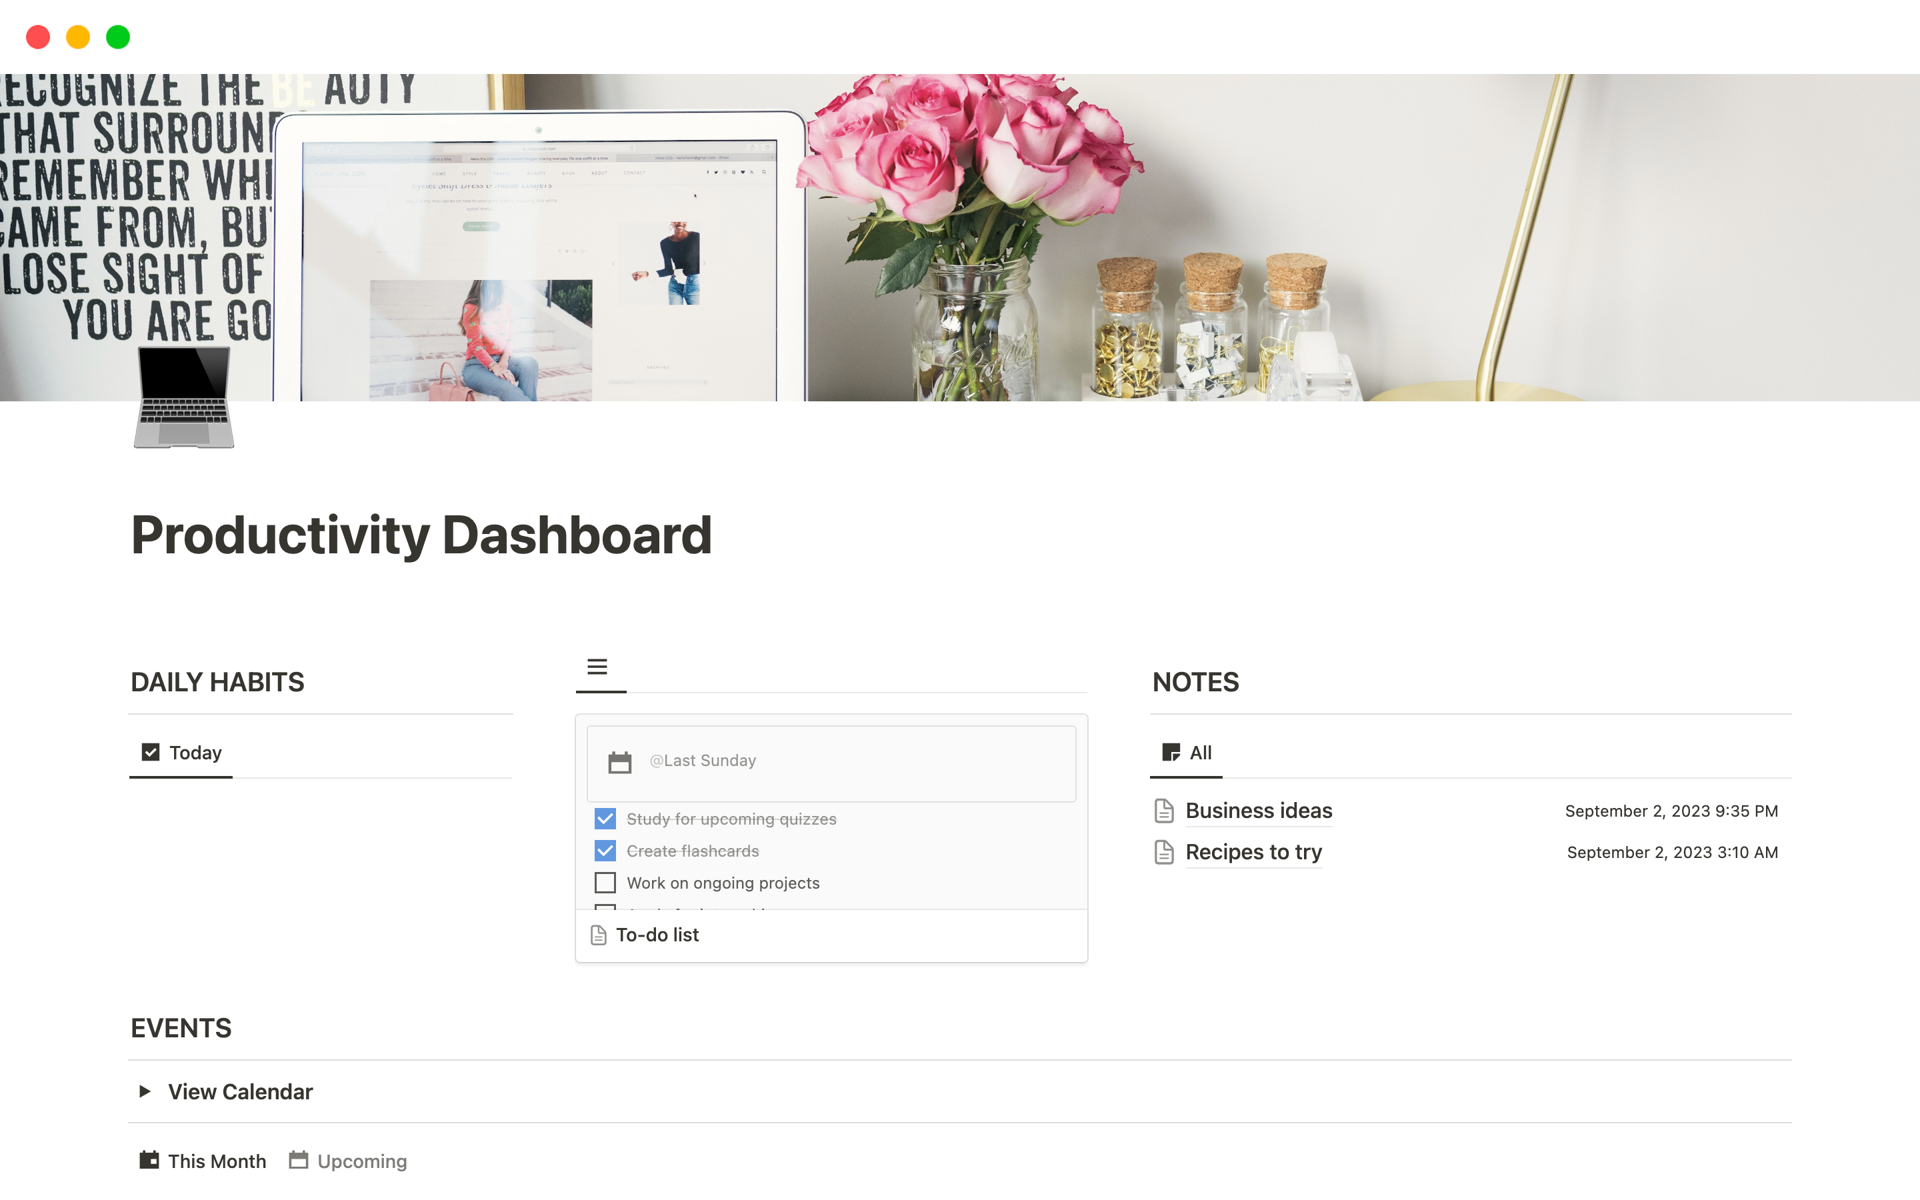 This productivity dashboard is a central hub for all your to-do lists, notes, events, and more!